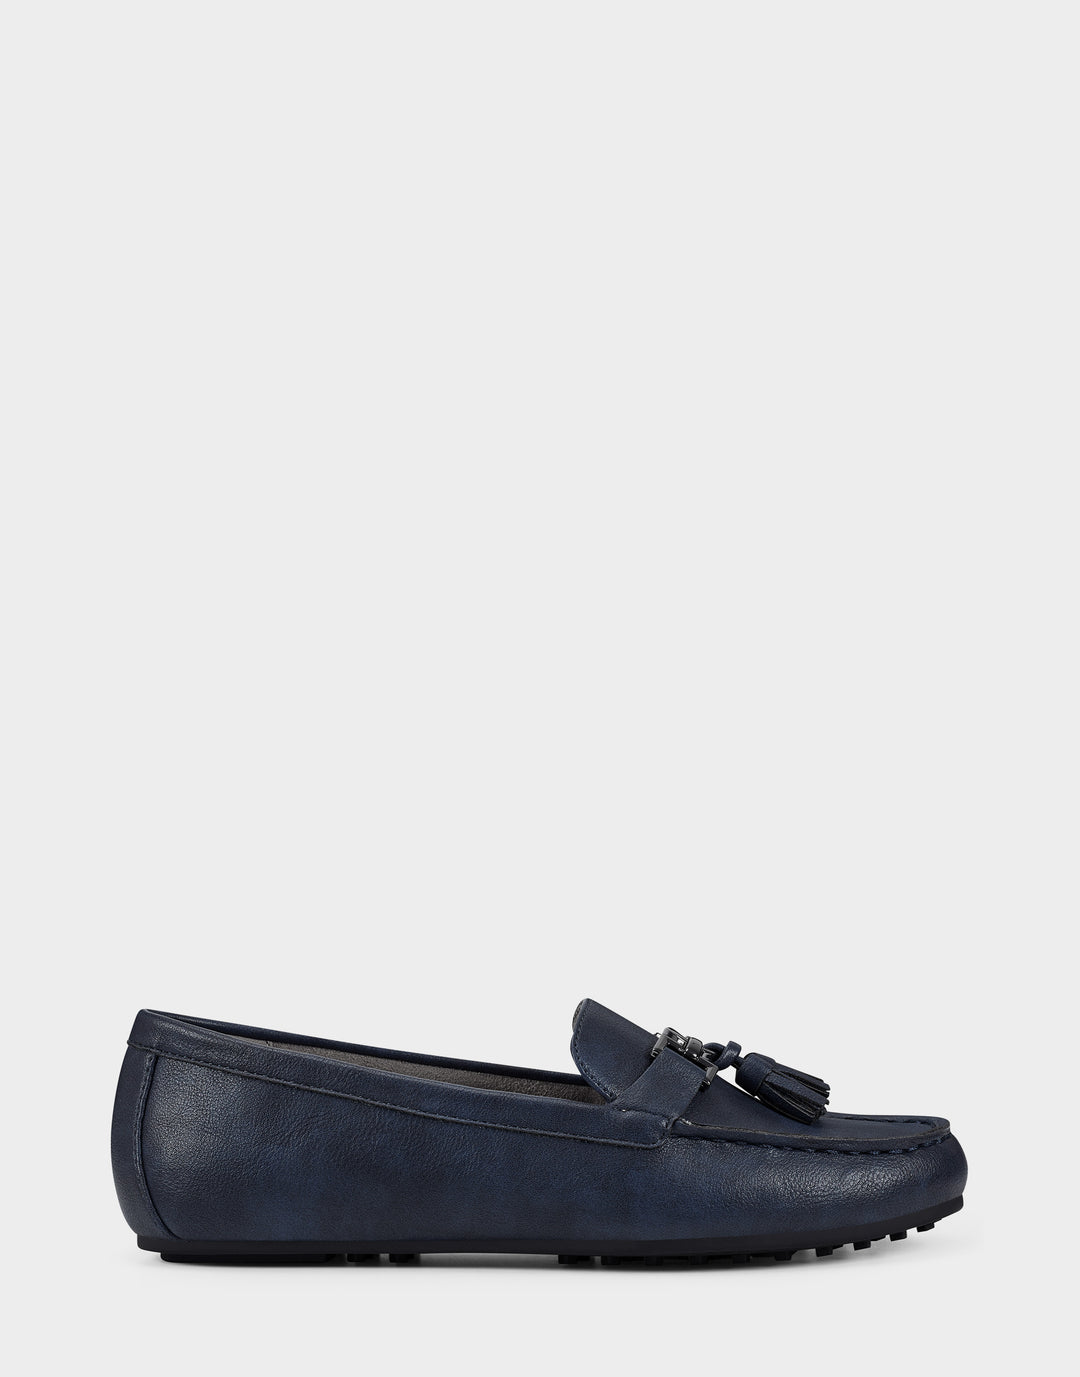 Deanna - comfortable women's loafers in blue